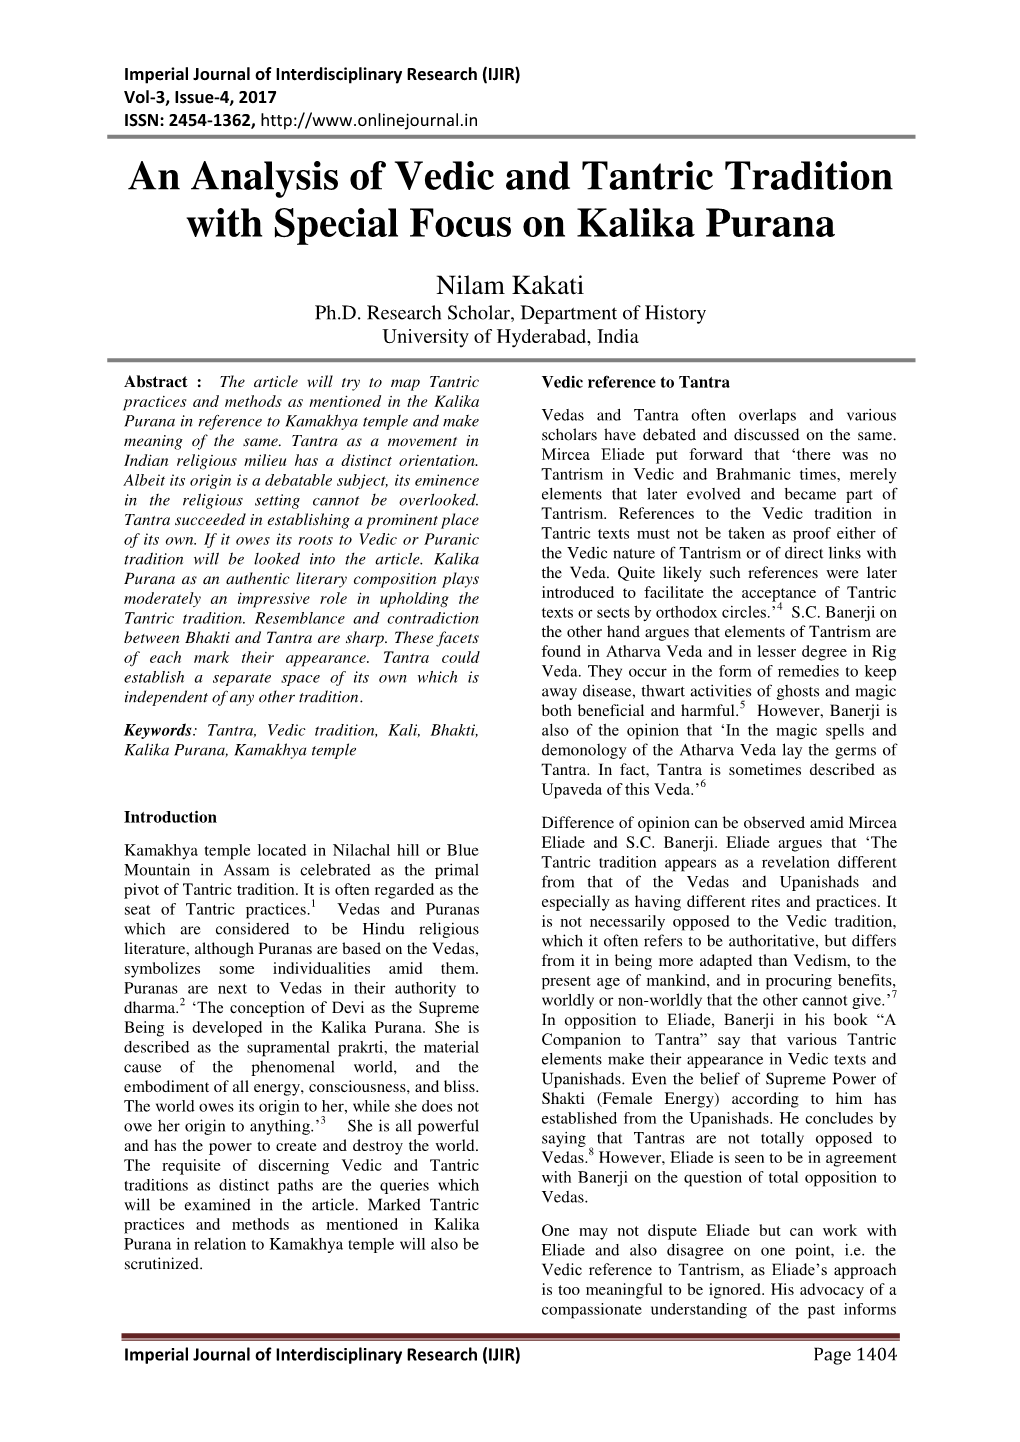 An Analysis of Vedic and Tantric Tradition with Special Focus on Kalika Purana